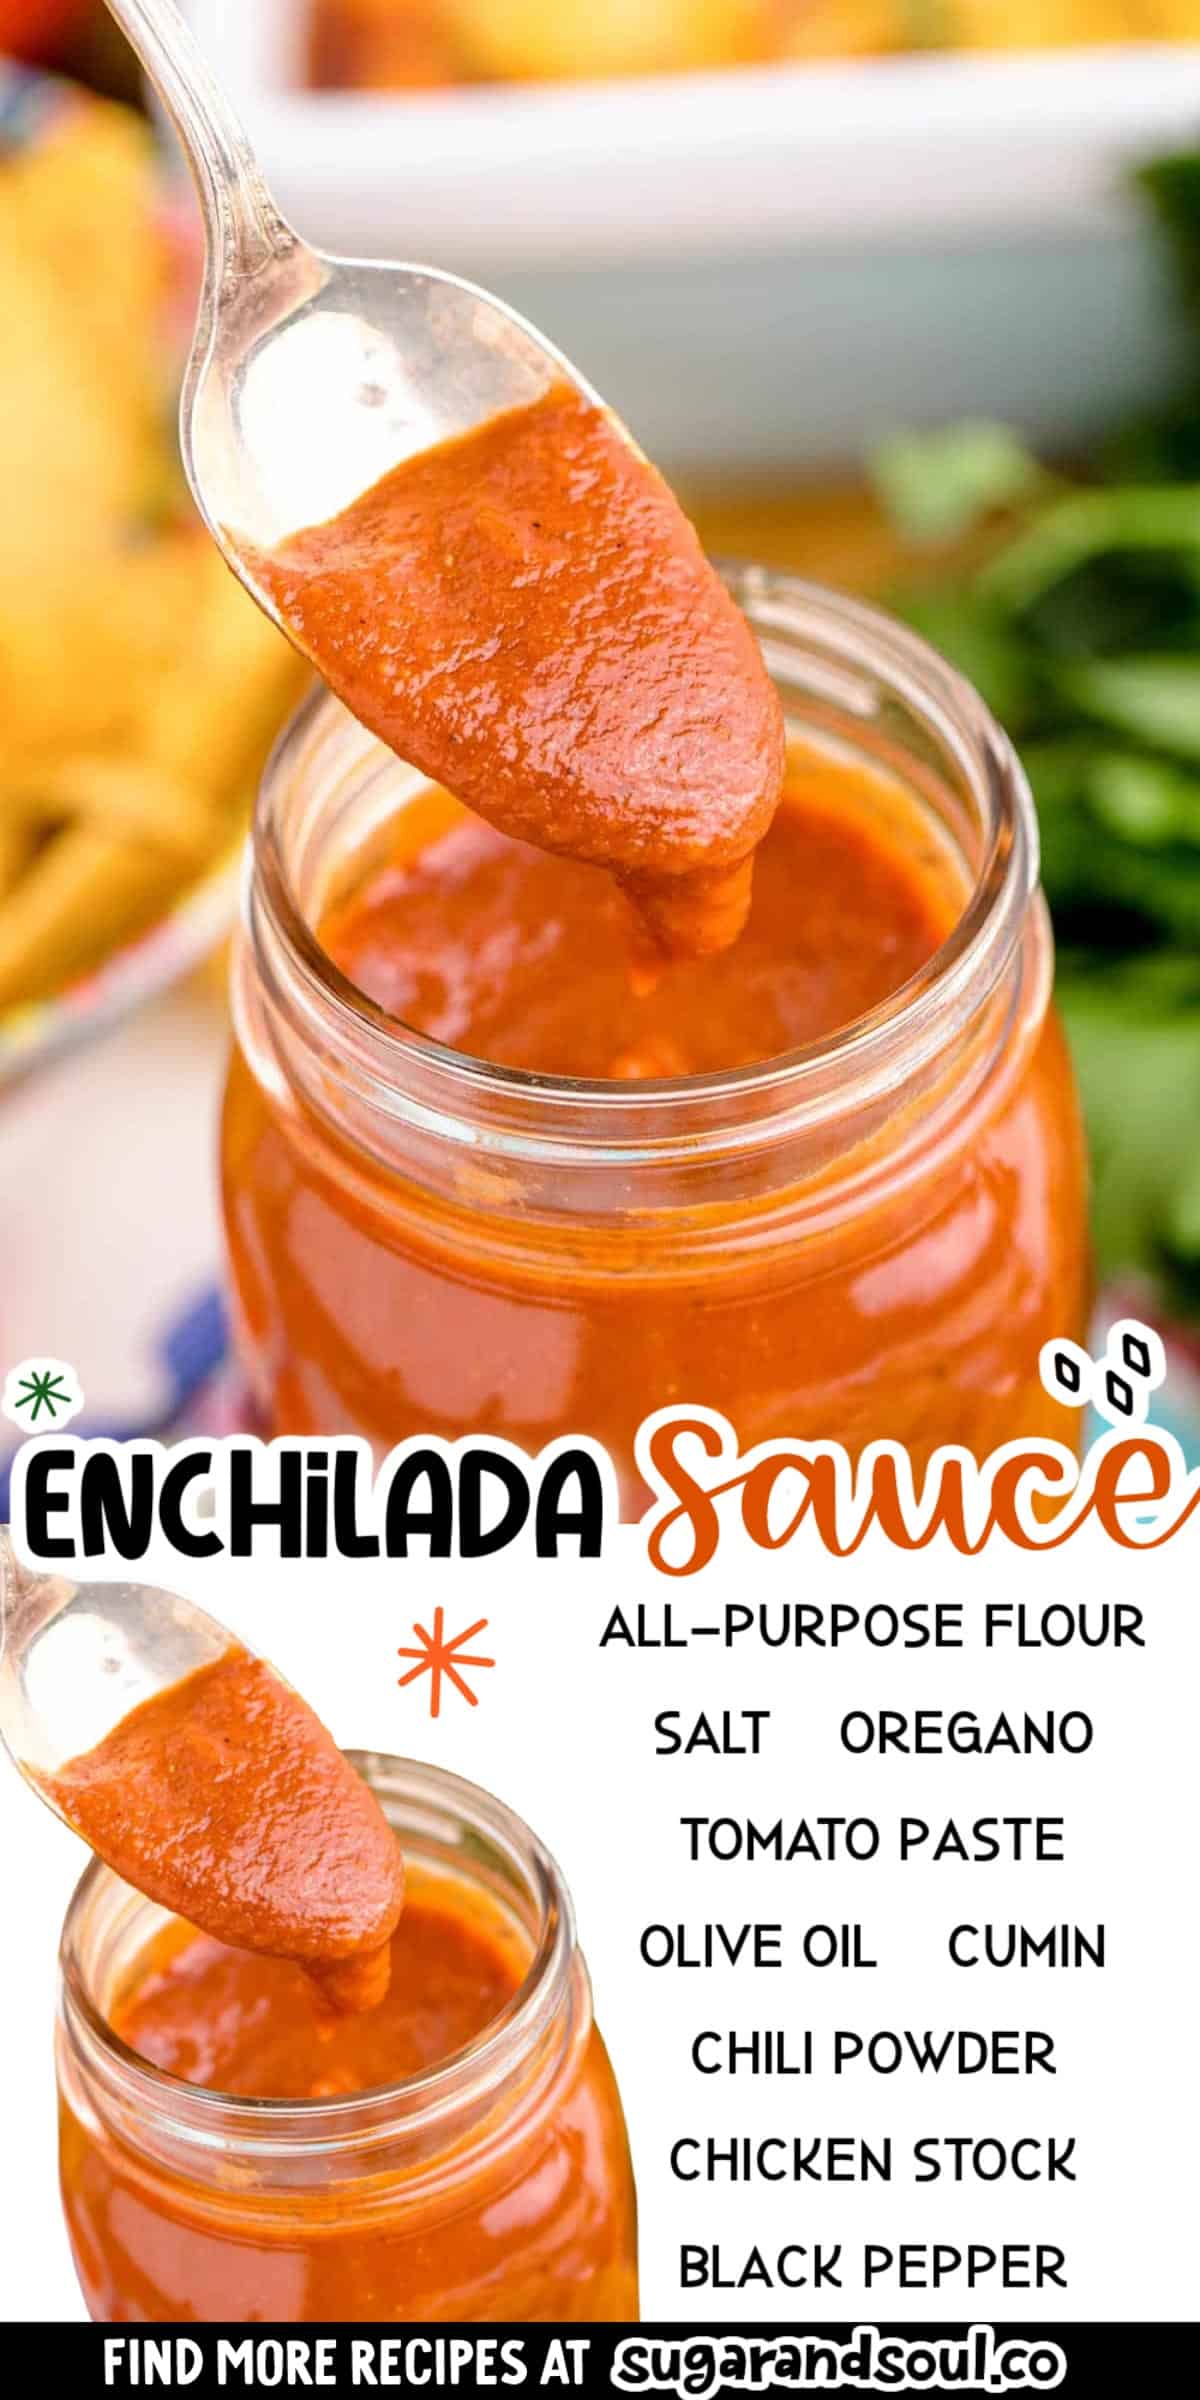 This Enchilada Sauce is a rich, savory Mexican red sauce made with chili powder, cumin, oregano, chicken stock, and tomato paste! It tastes way better than store bought and is ready in just 25 minutes! via @sugarandsoulco